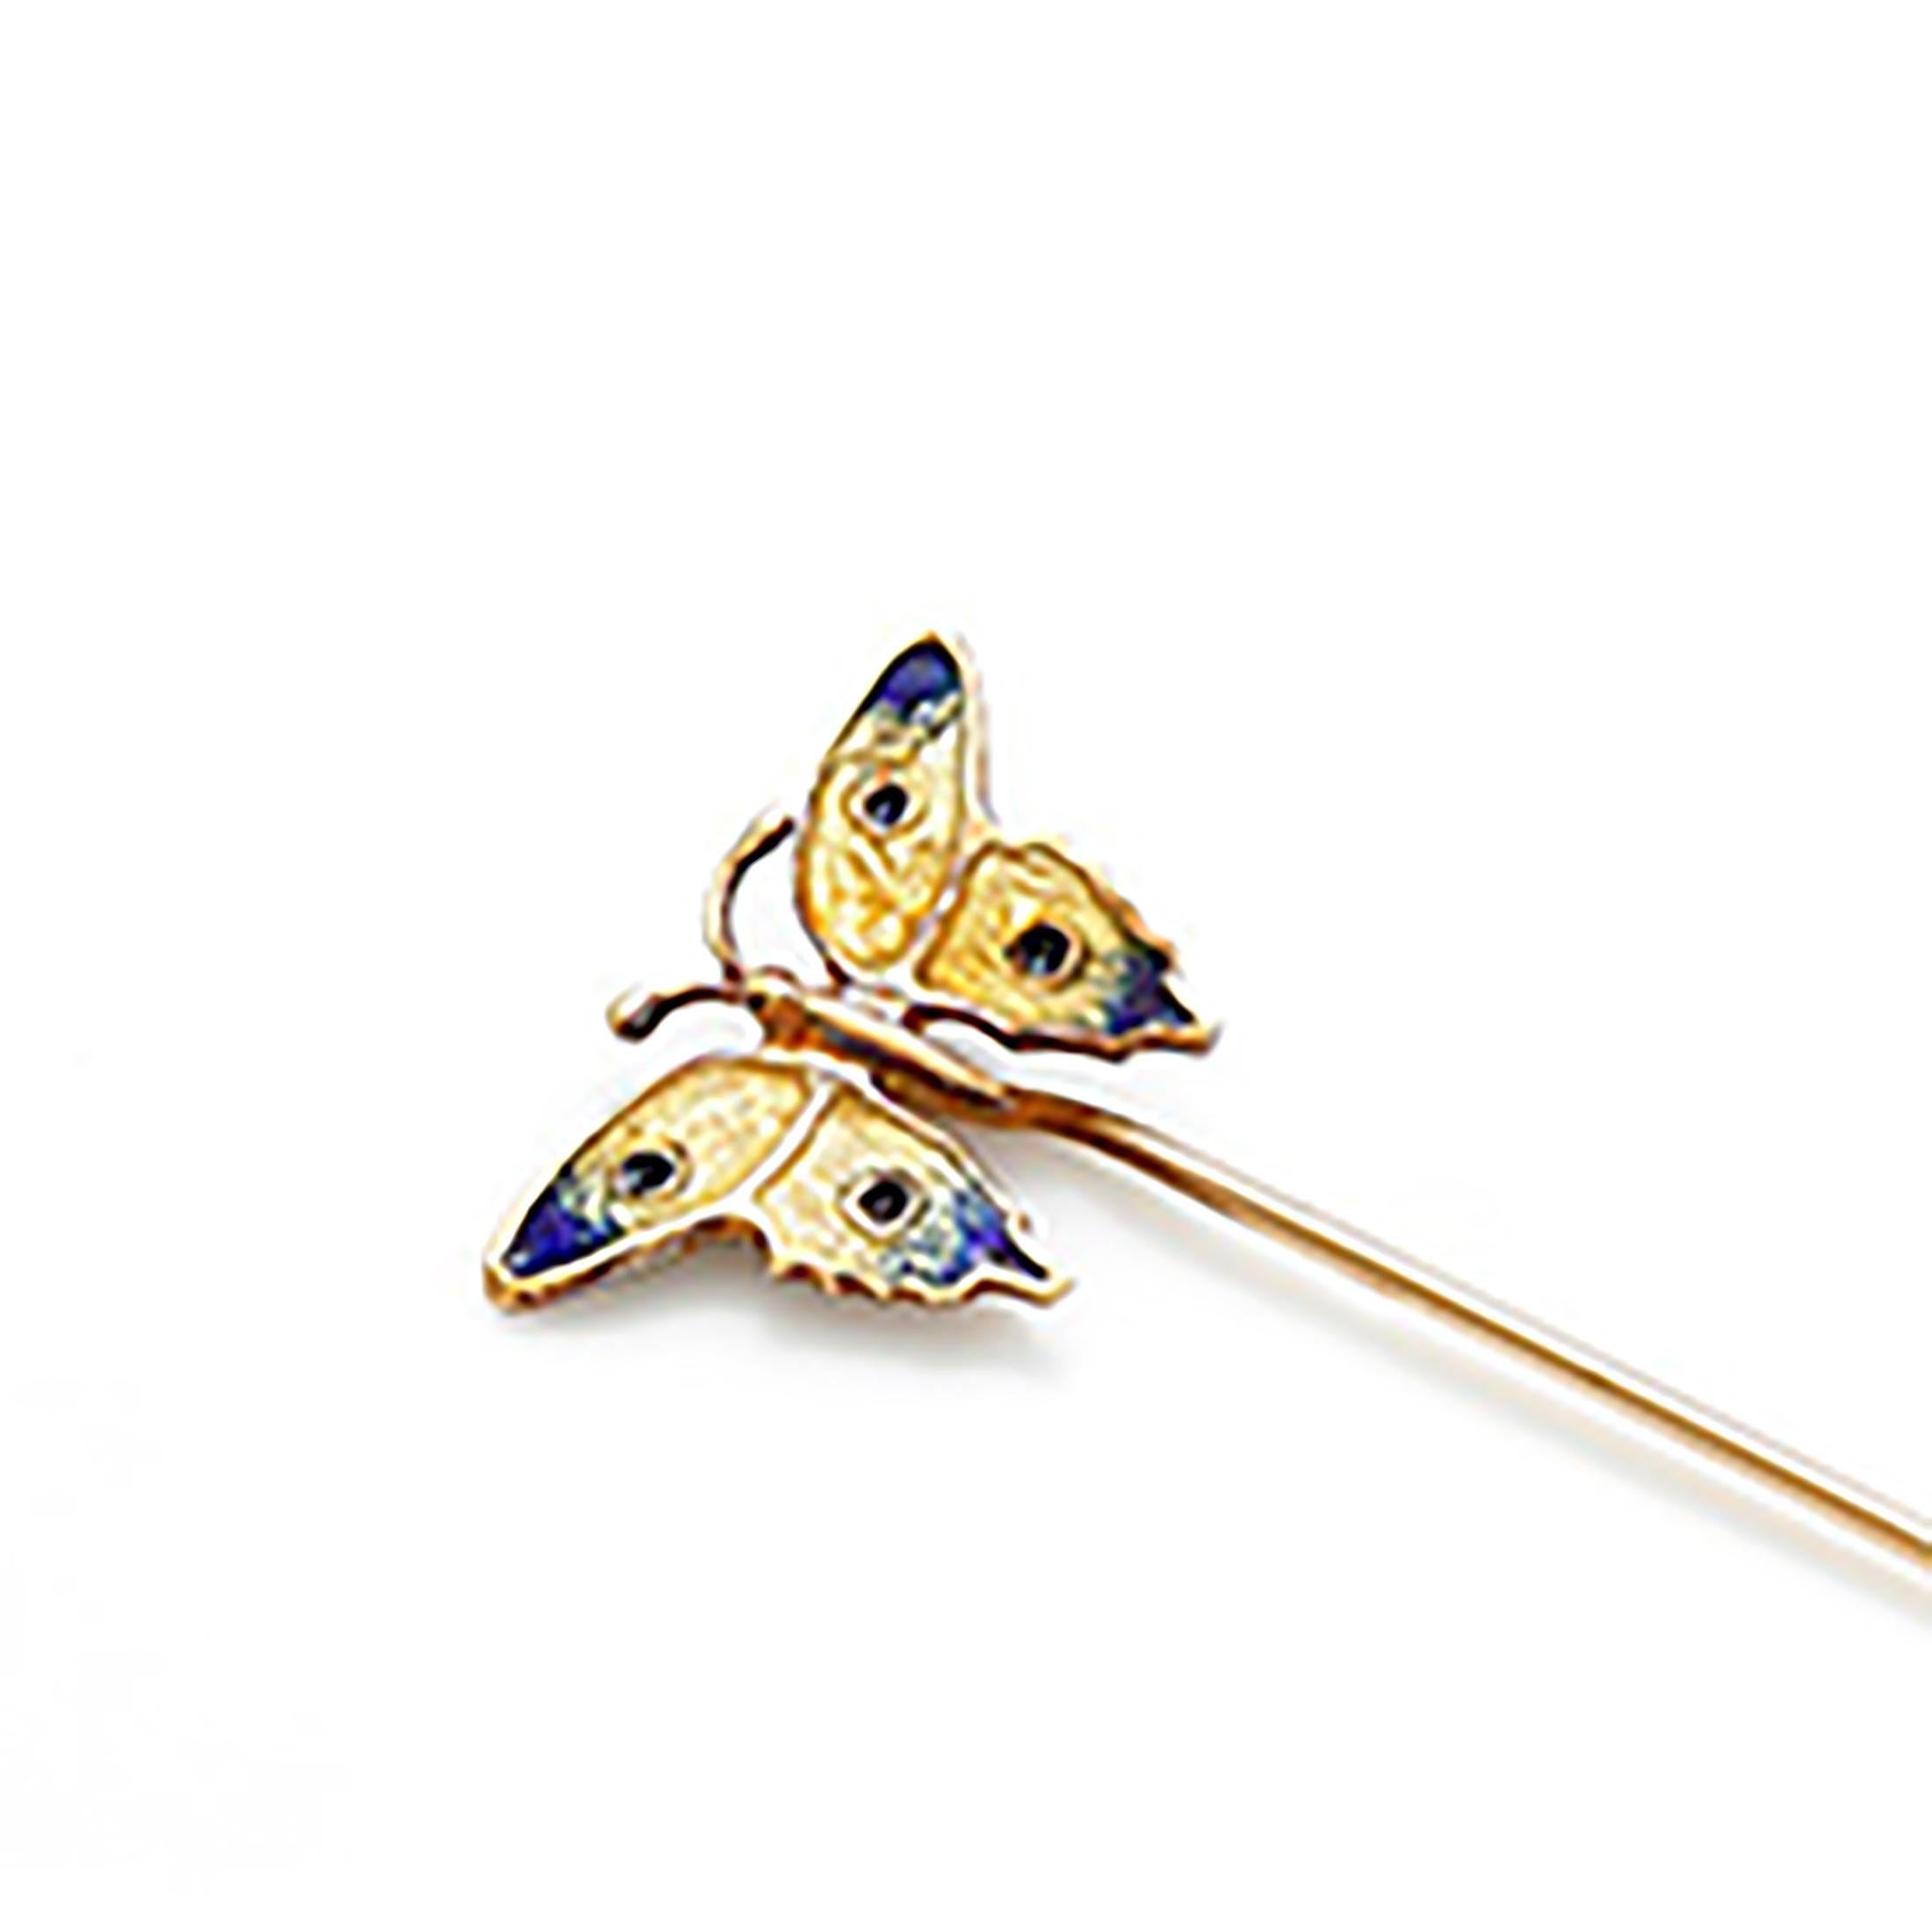 Art Deco 18 karat yellow gold butterfly stick pin
Blue and yellow enamel 
One of a kind 
Very good condition